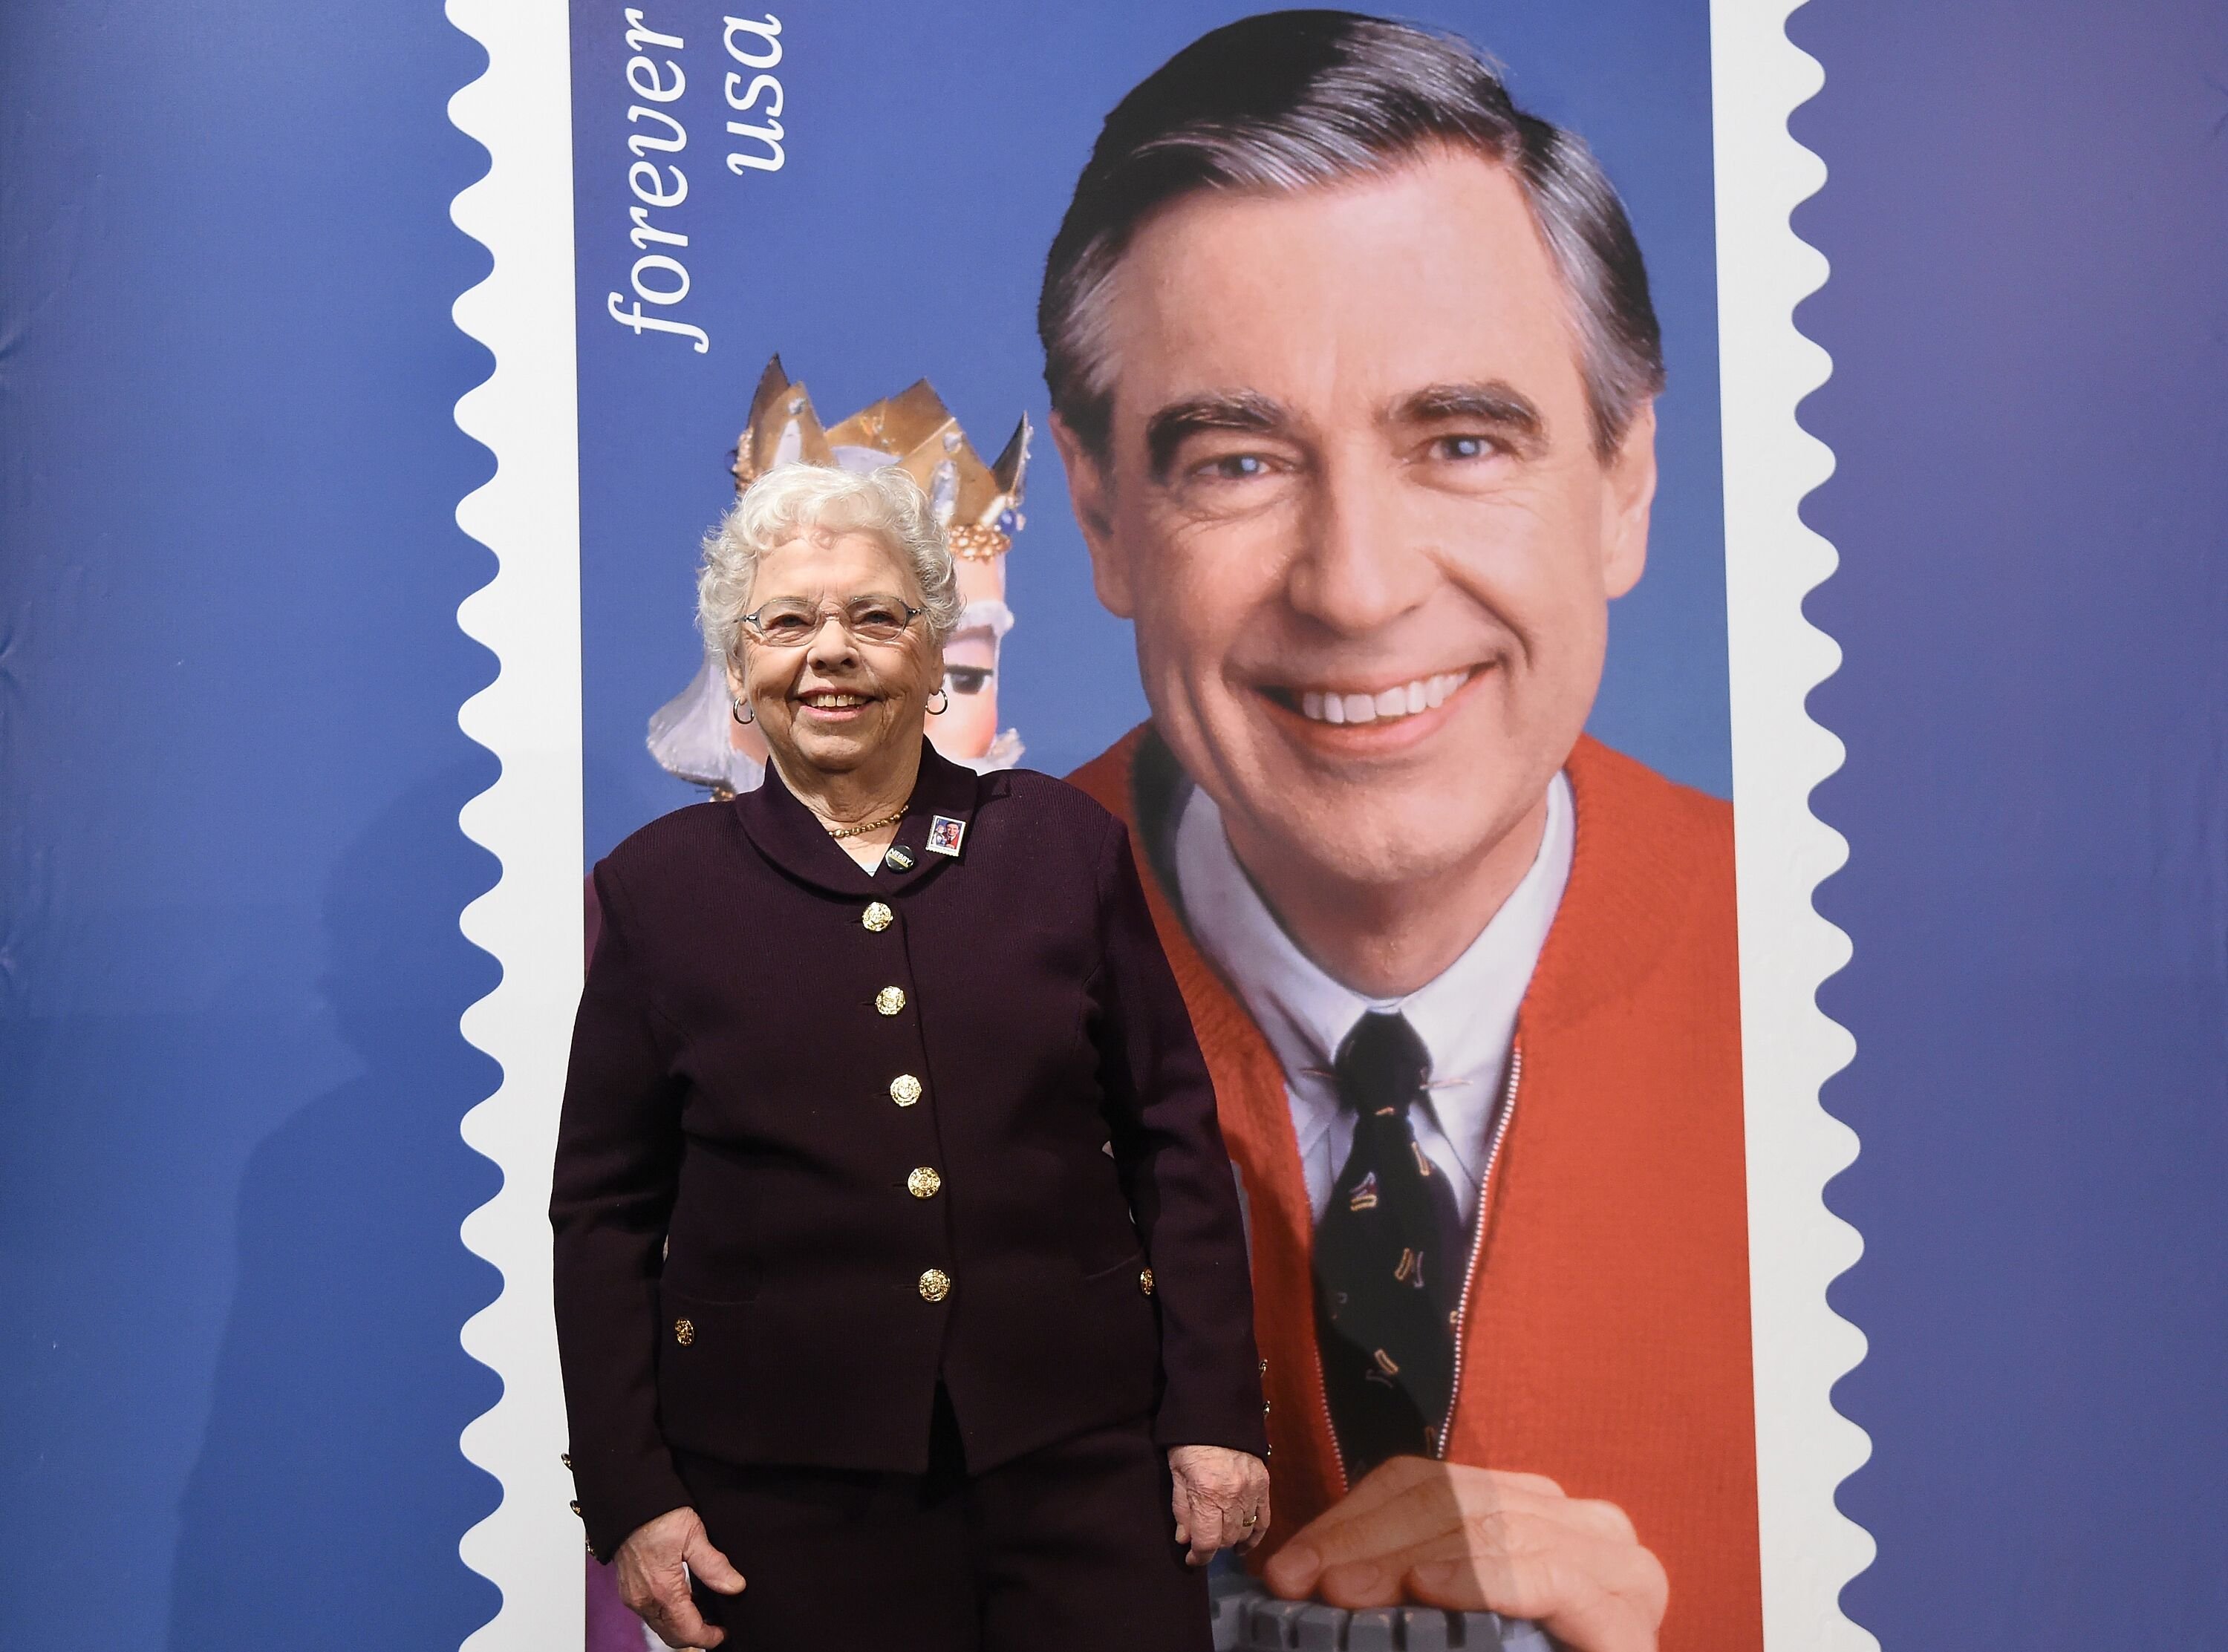 Joanne Rogers attends the U.S. Postal Service Dedication of the Mister Rogers Forever Stamp. | Source: Getty Images